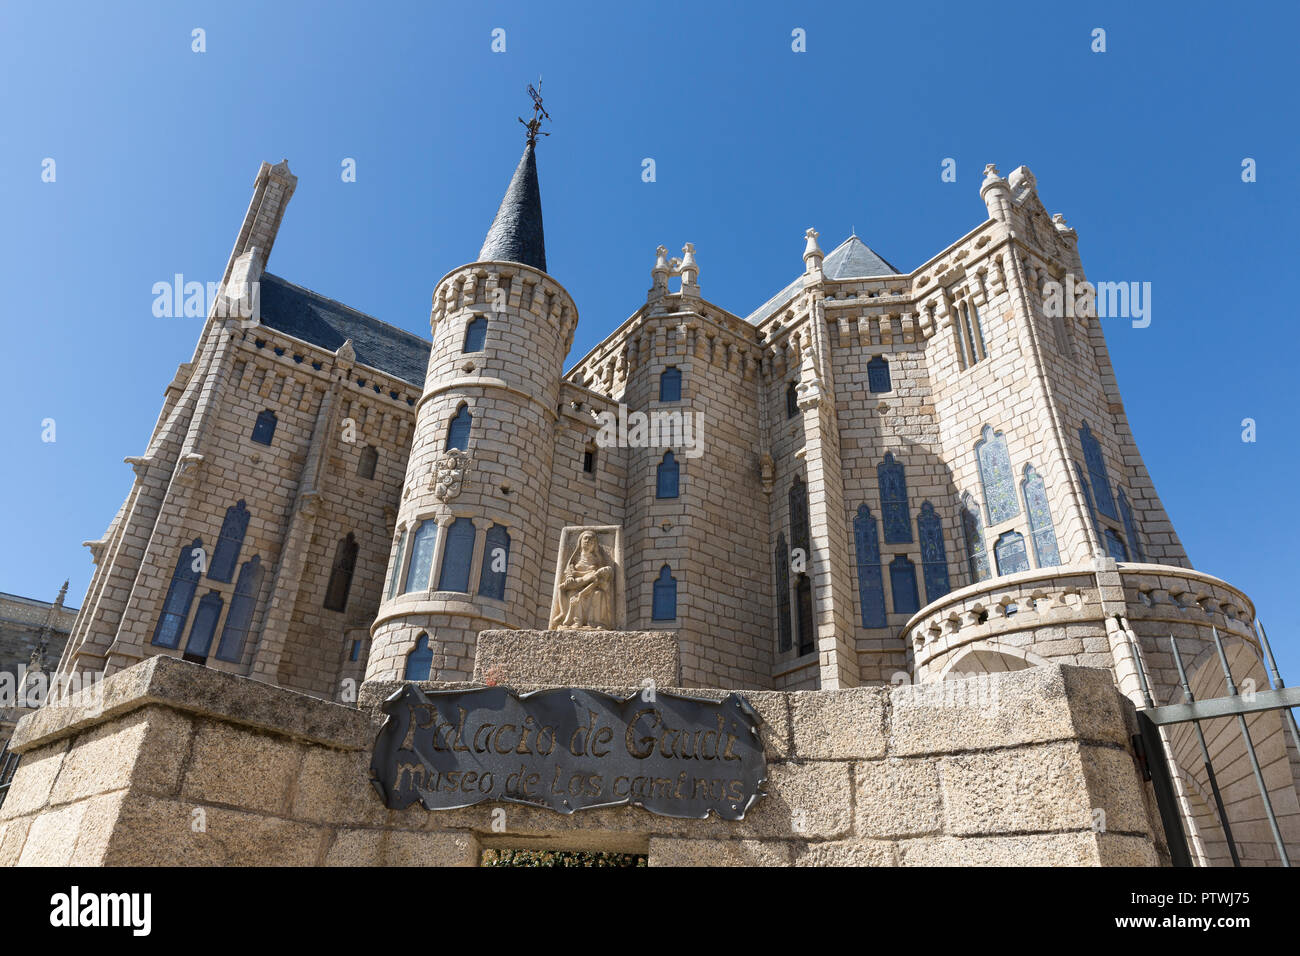 Astorga, Spain: The main facade of the Episcopal Palace of Astorga. Built by Catalan architect Antoni Gaudí between 1889 and 1913, the building now ho Stock Photo